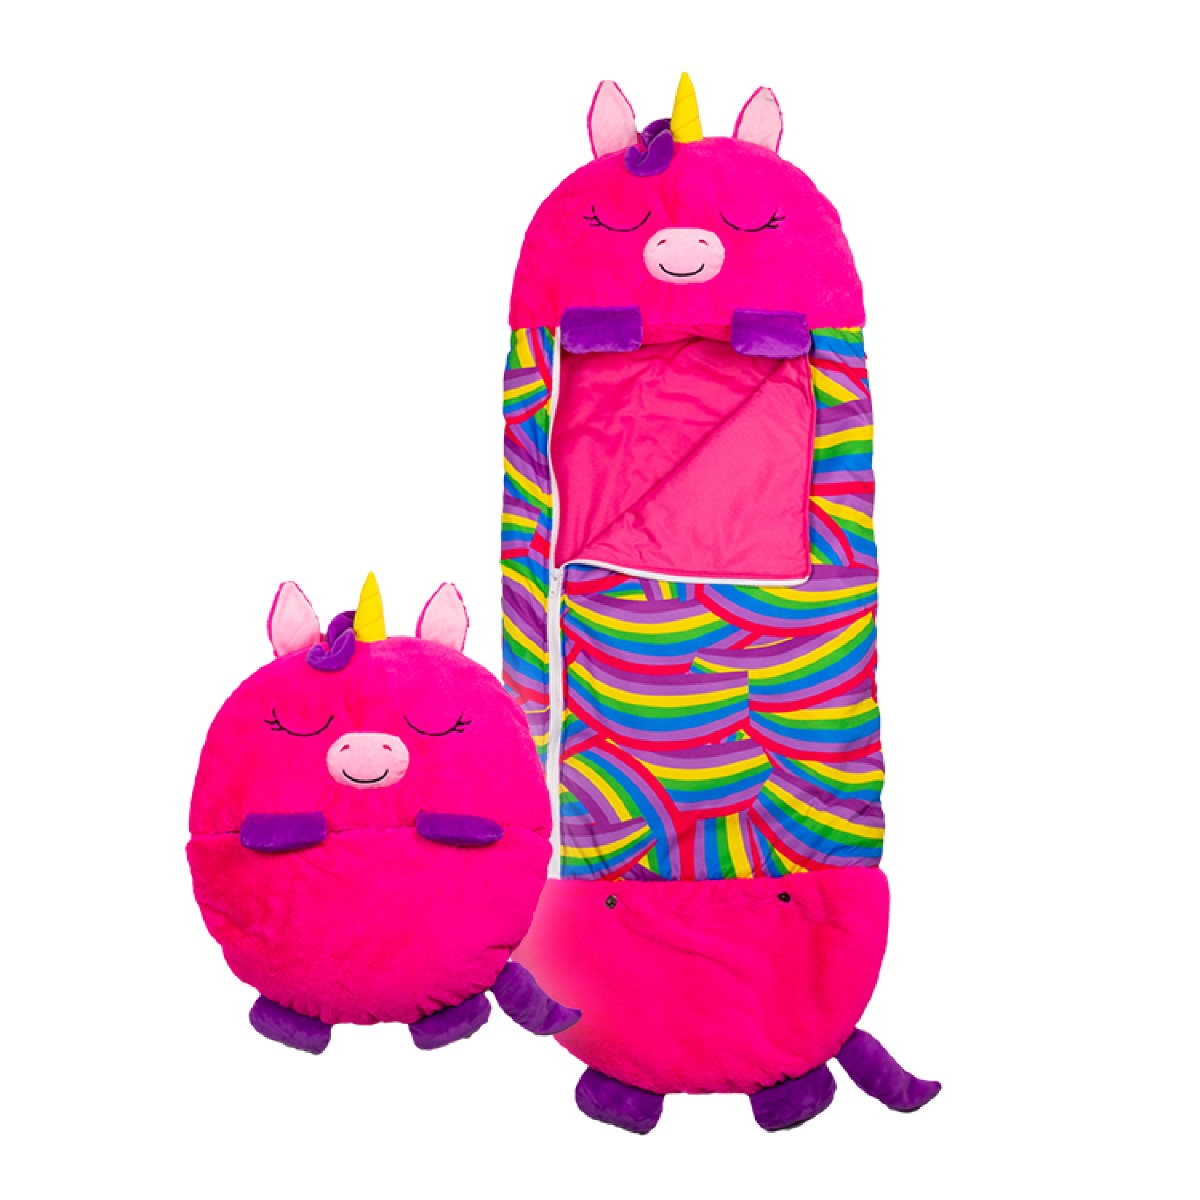 View Happy Nappers Pink Unicorn Medium Ages 3 To 6 Plush Toy That Opens To A Fun Sleeping Bag High Street TV information